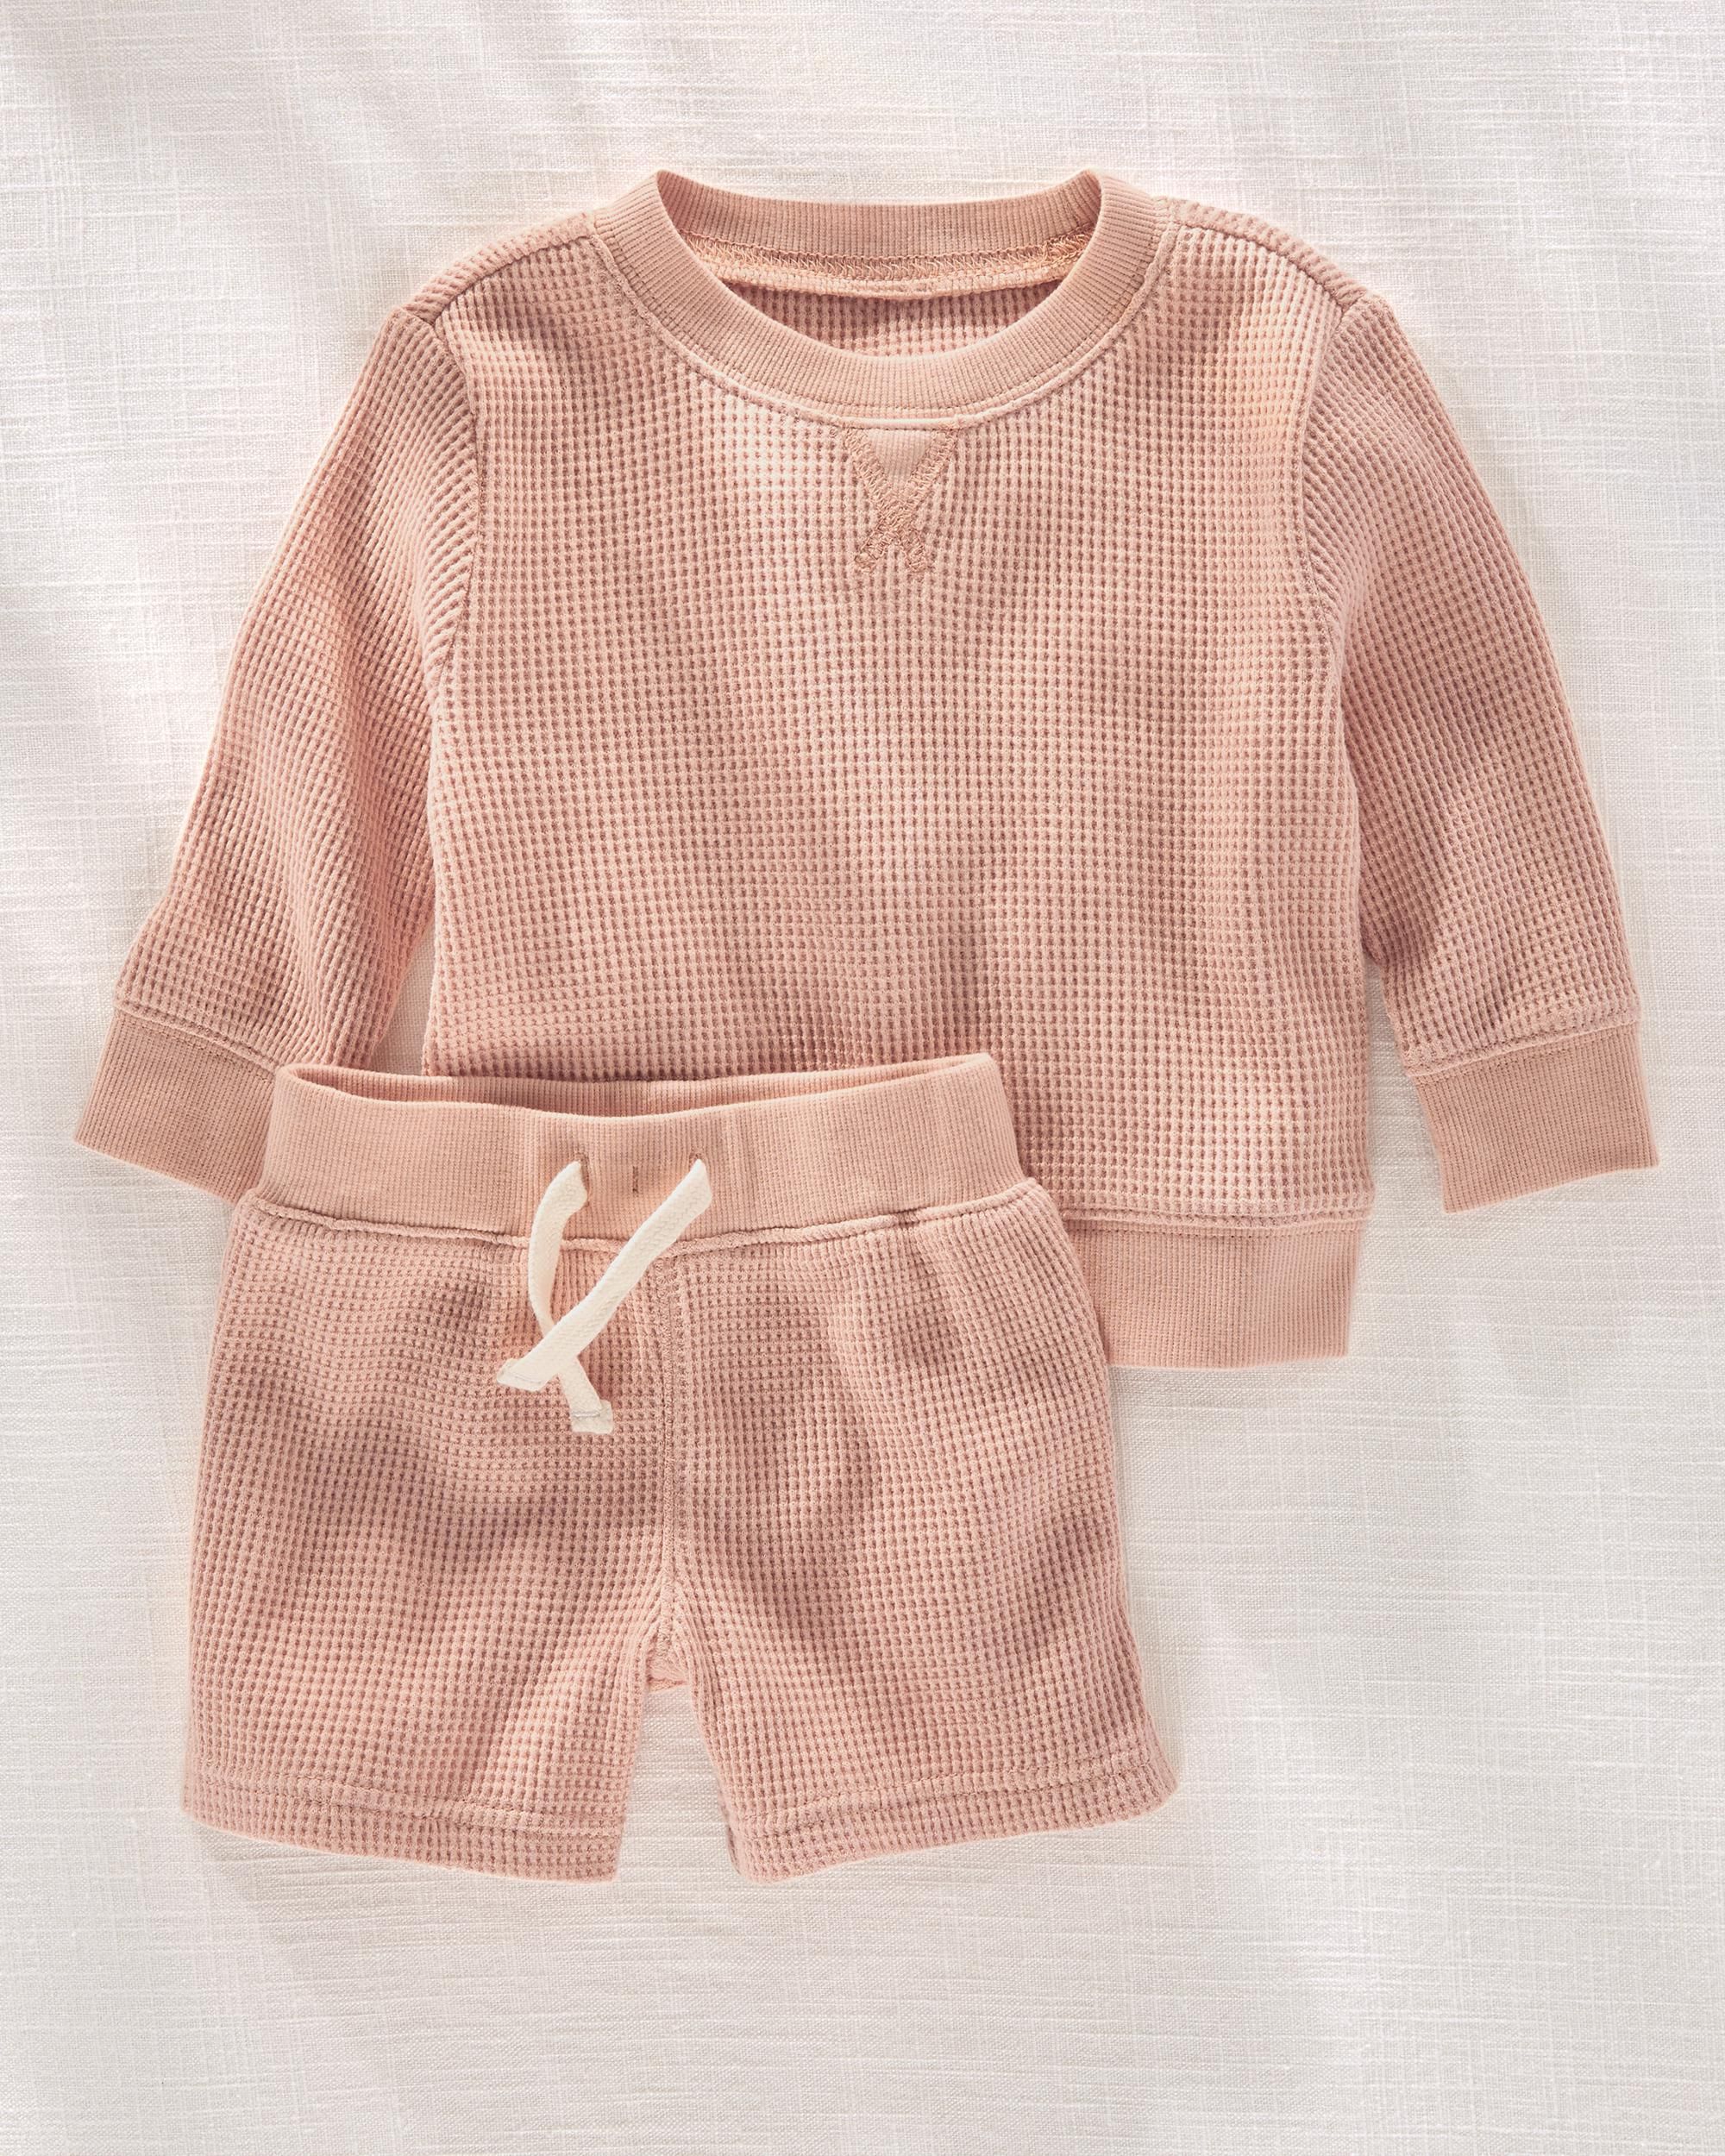 Baby Hilary Duff 2-Piece Thermal Outfit Set | Carter's